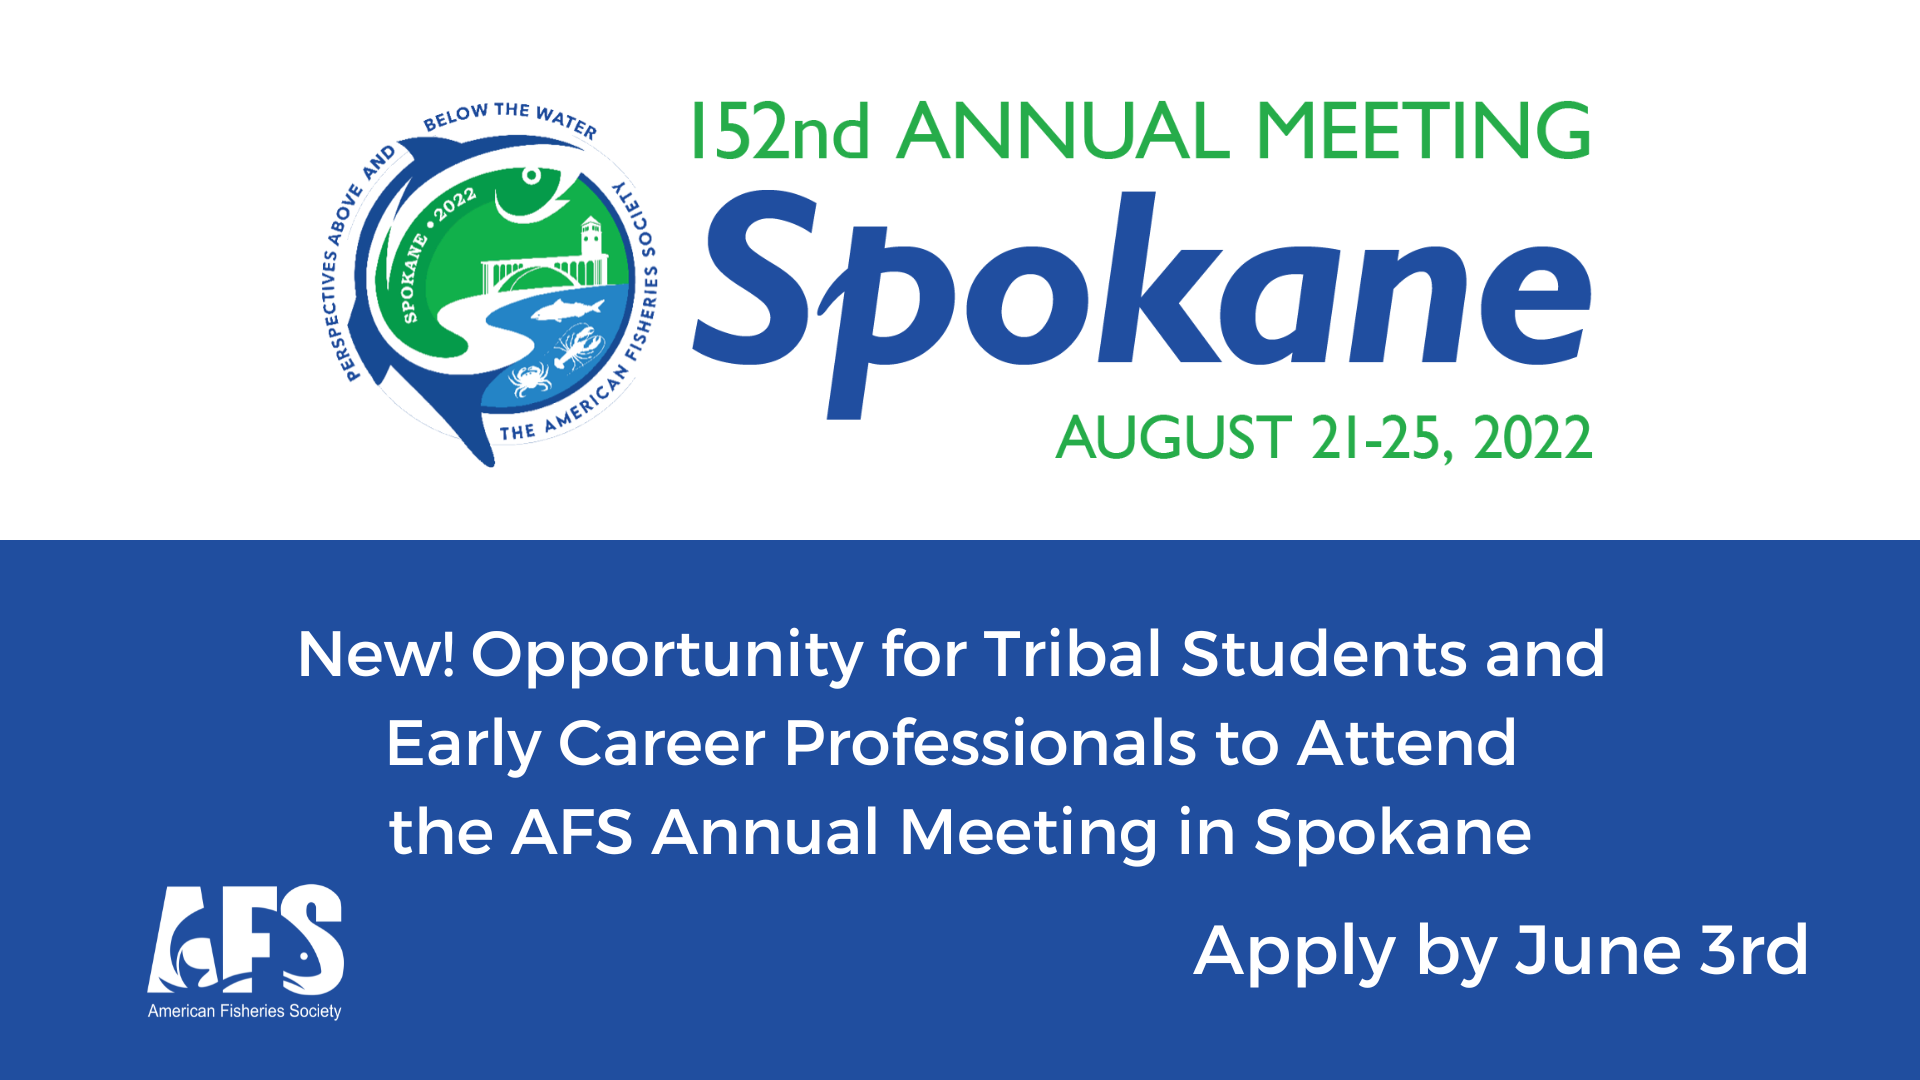 Opportunity for Tribal Fisheries Students and Early Career Professionals to Attend the AFS Annual Meeting in Spokane